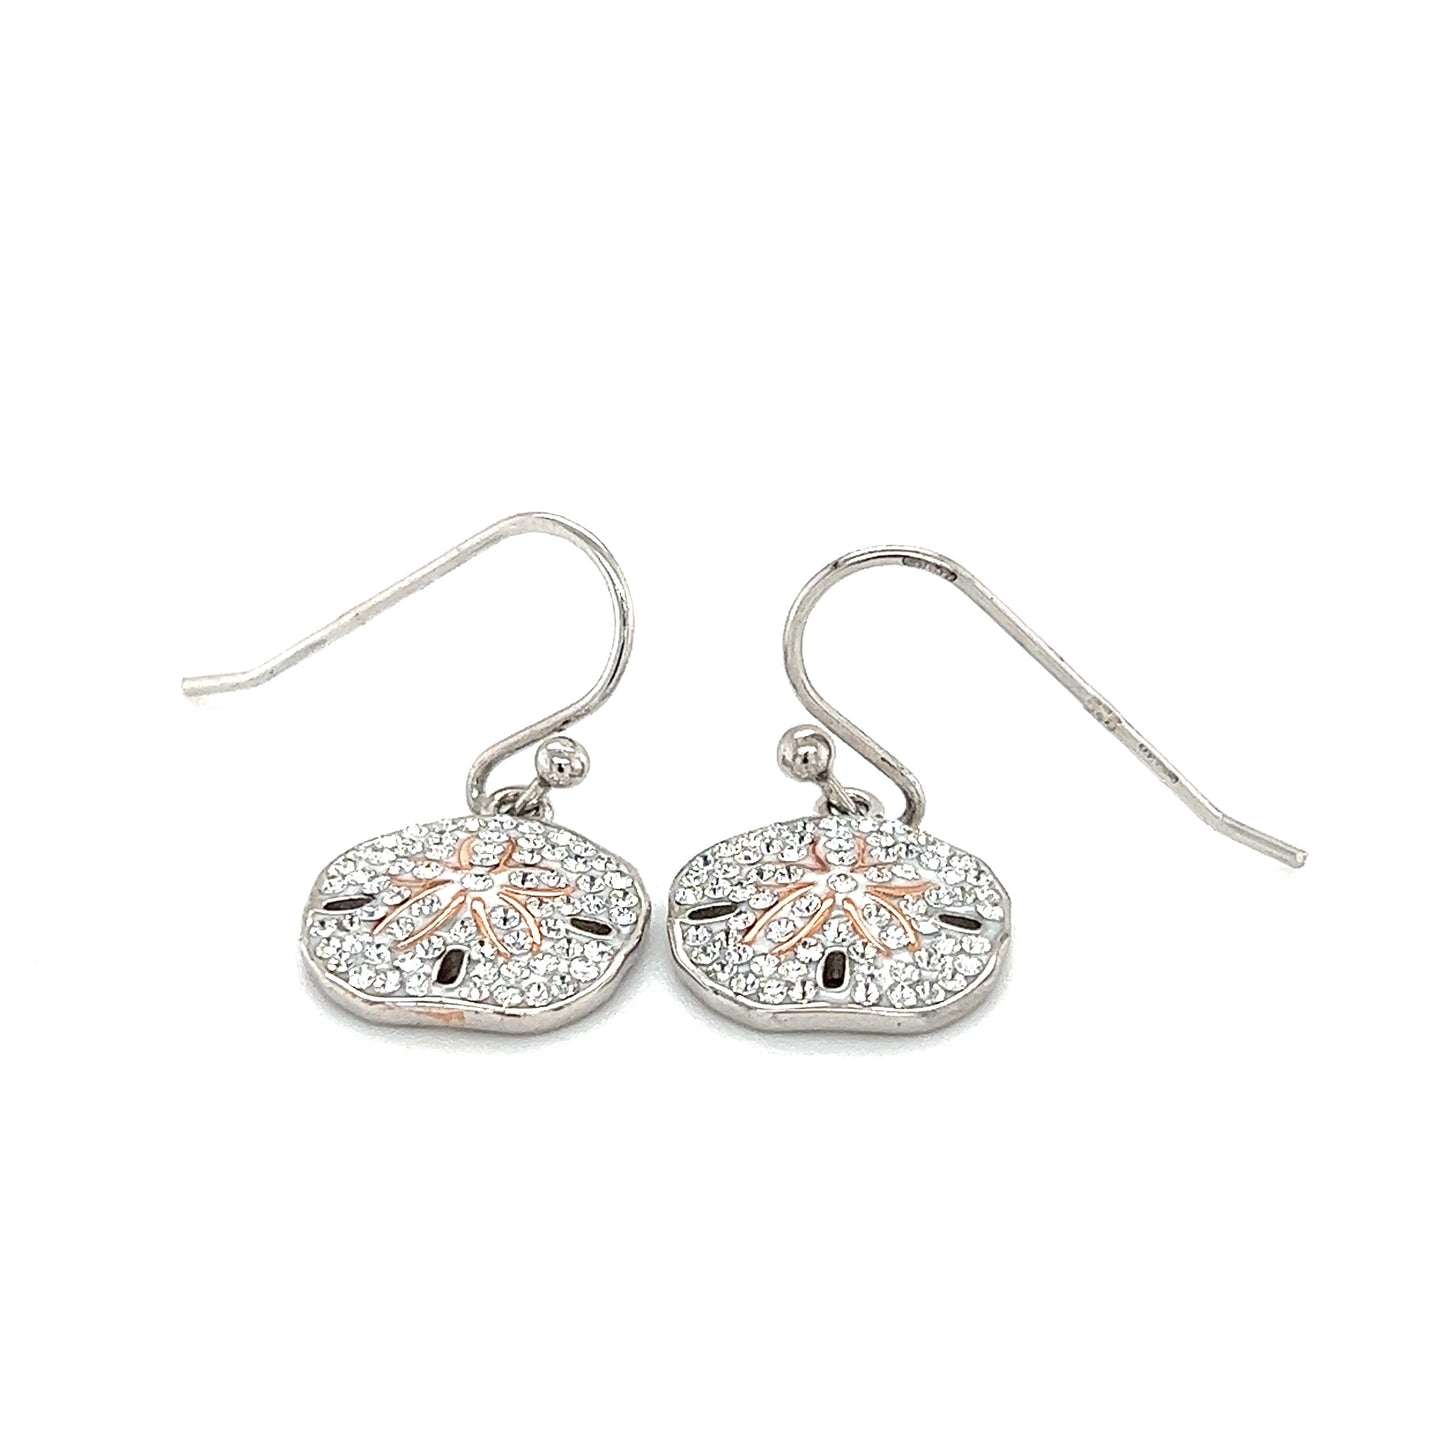 Sand Dollar Dangle Earrings with White Crystals in Sterling Silver Front Flat View